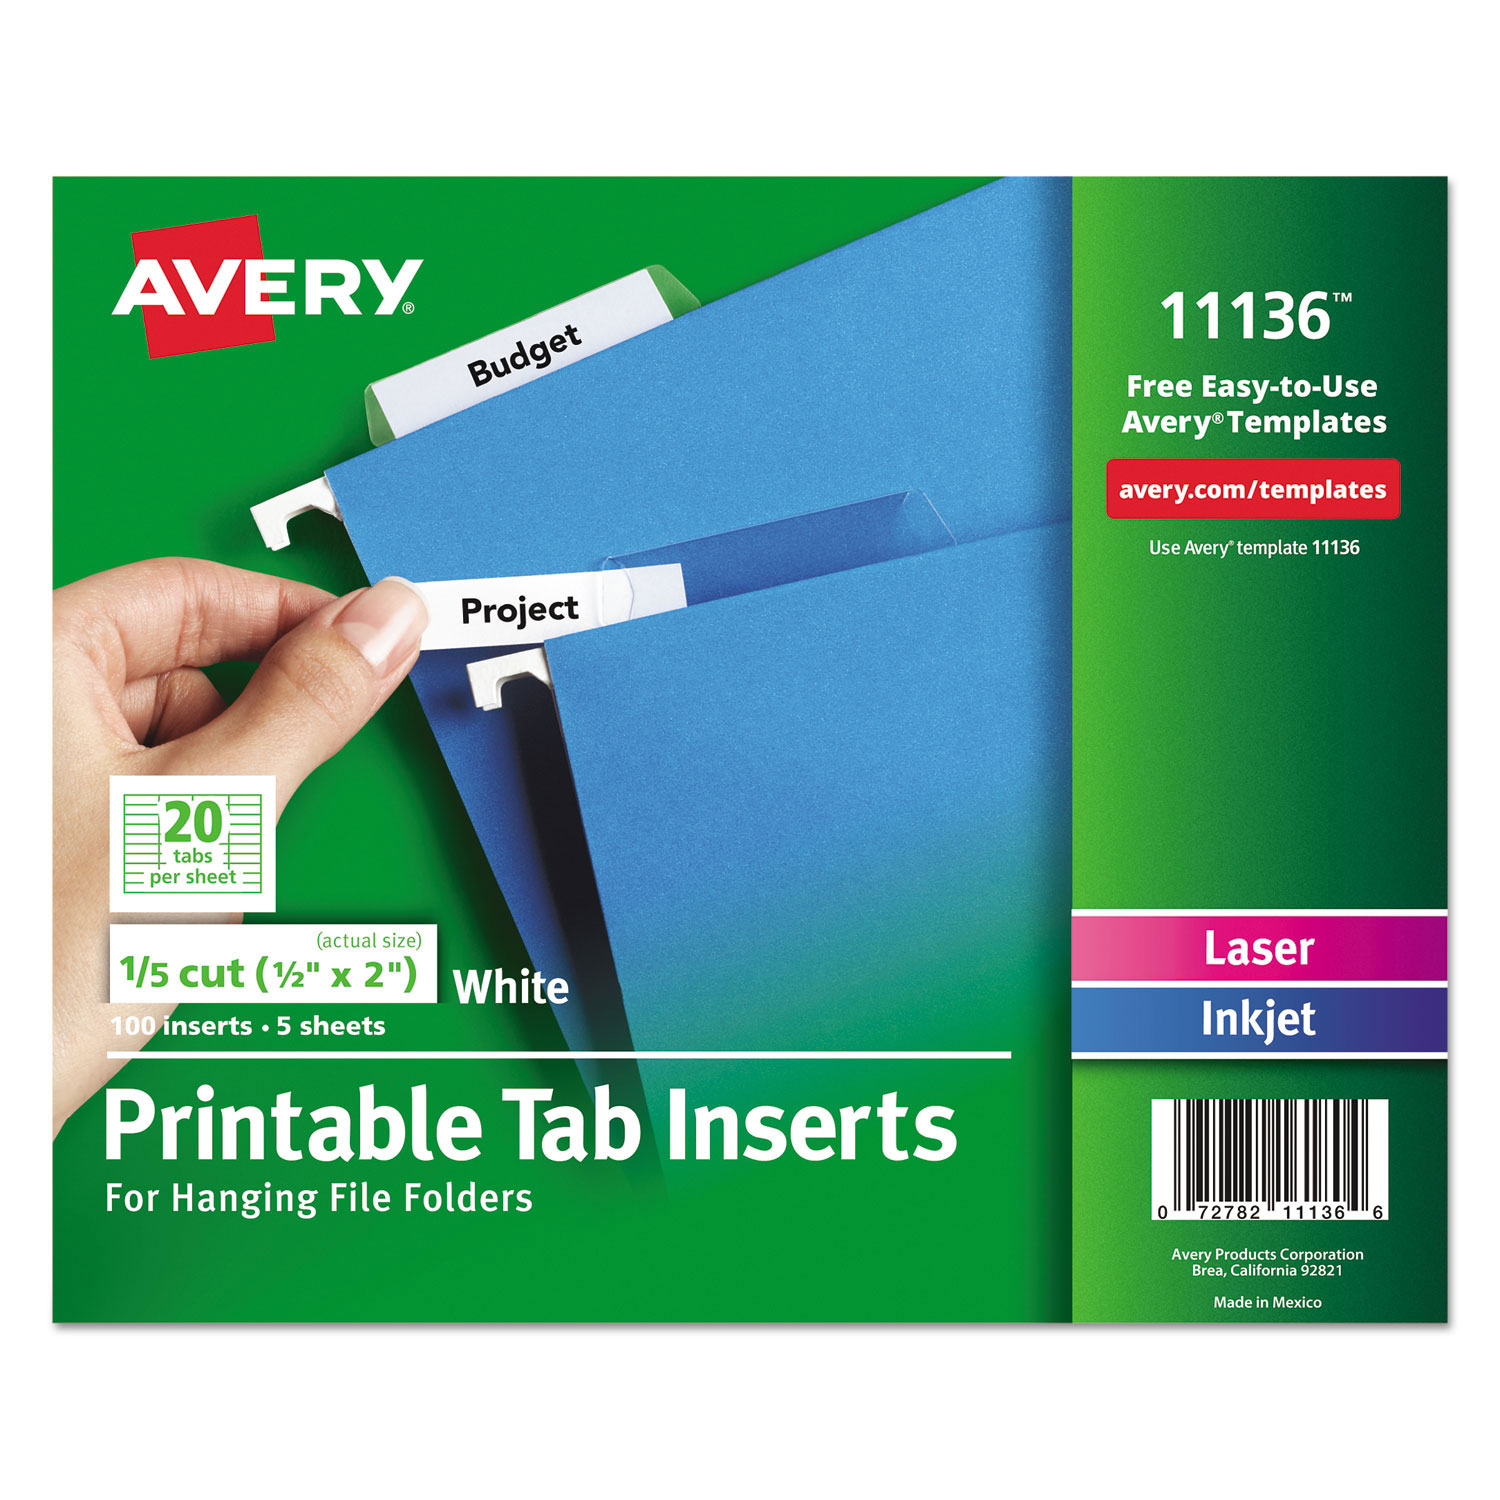 avery-tabs-inserts-for-hanging-file-folders-1-5-cut-tabs-white-2